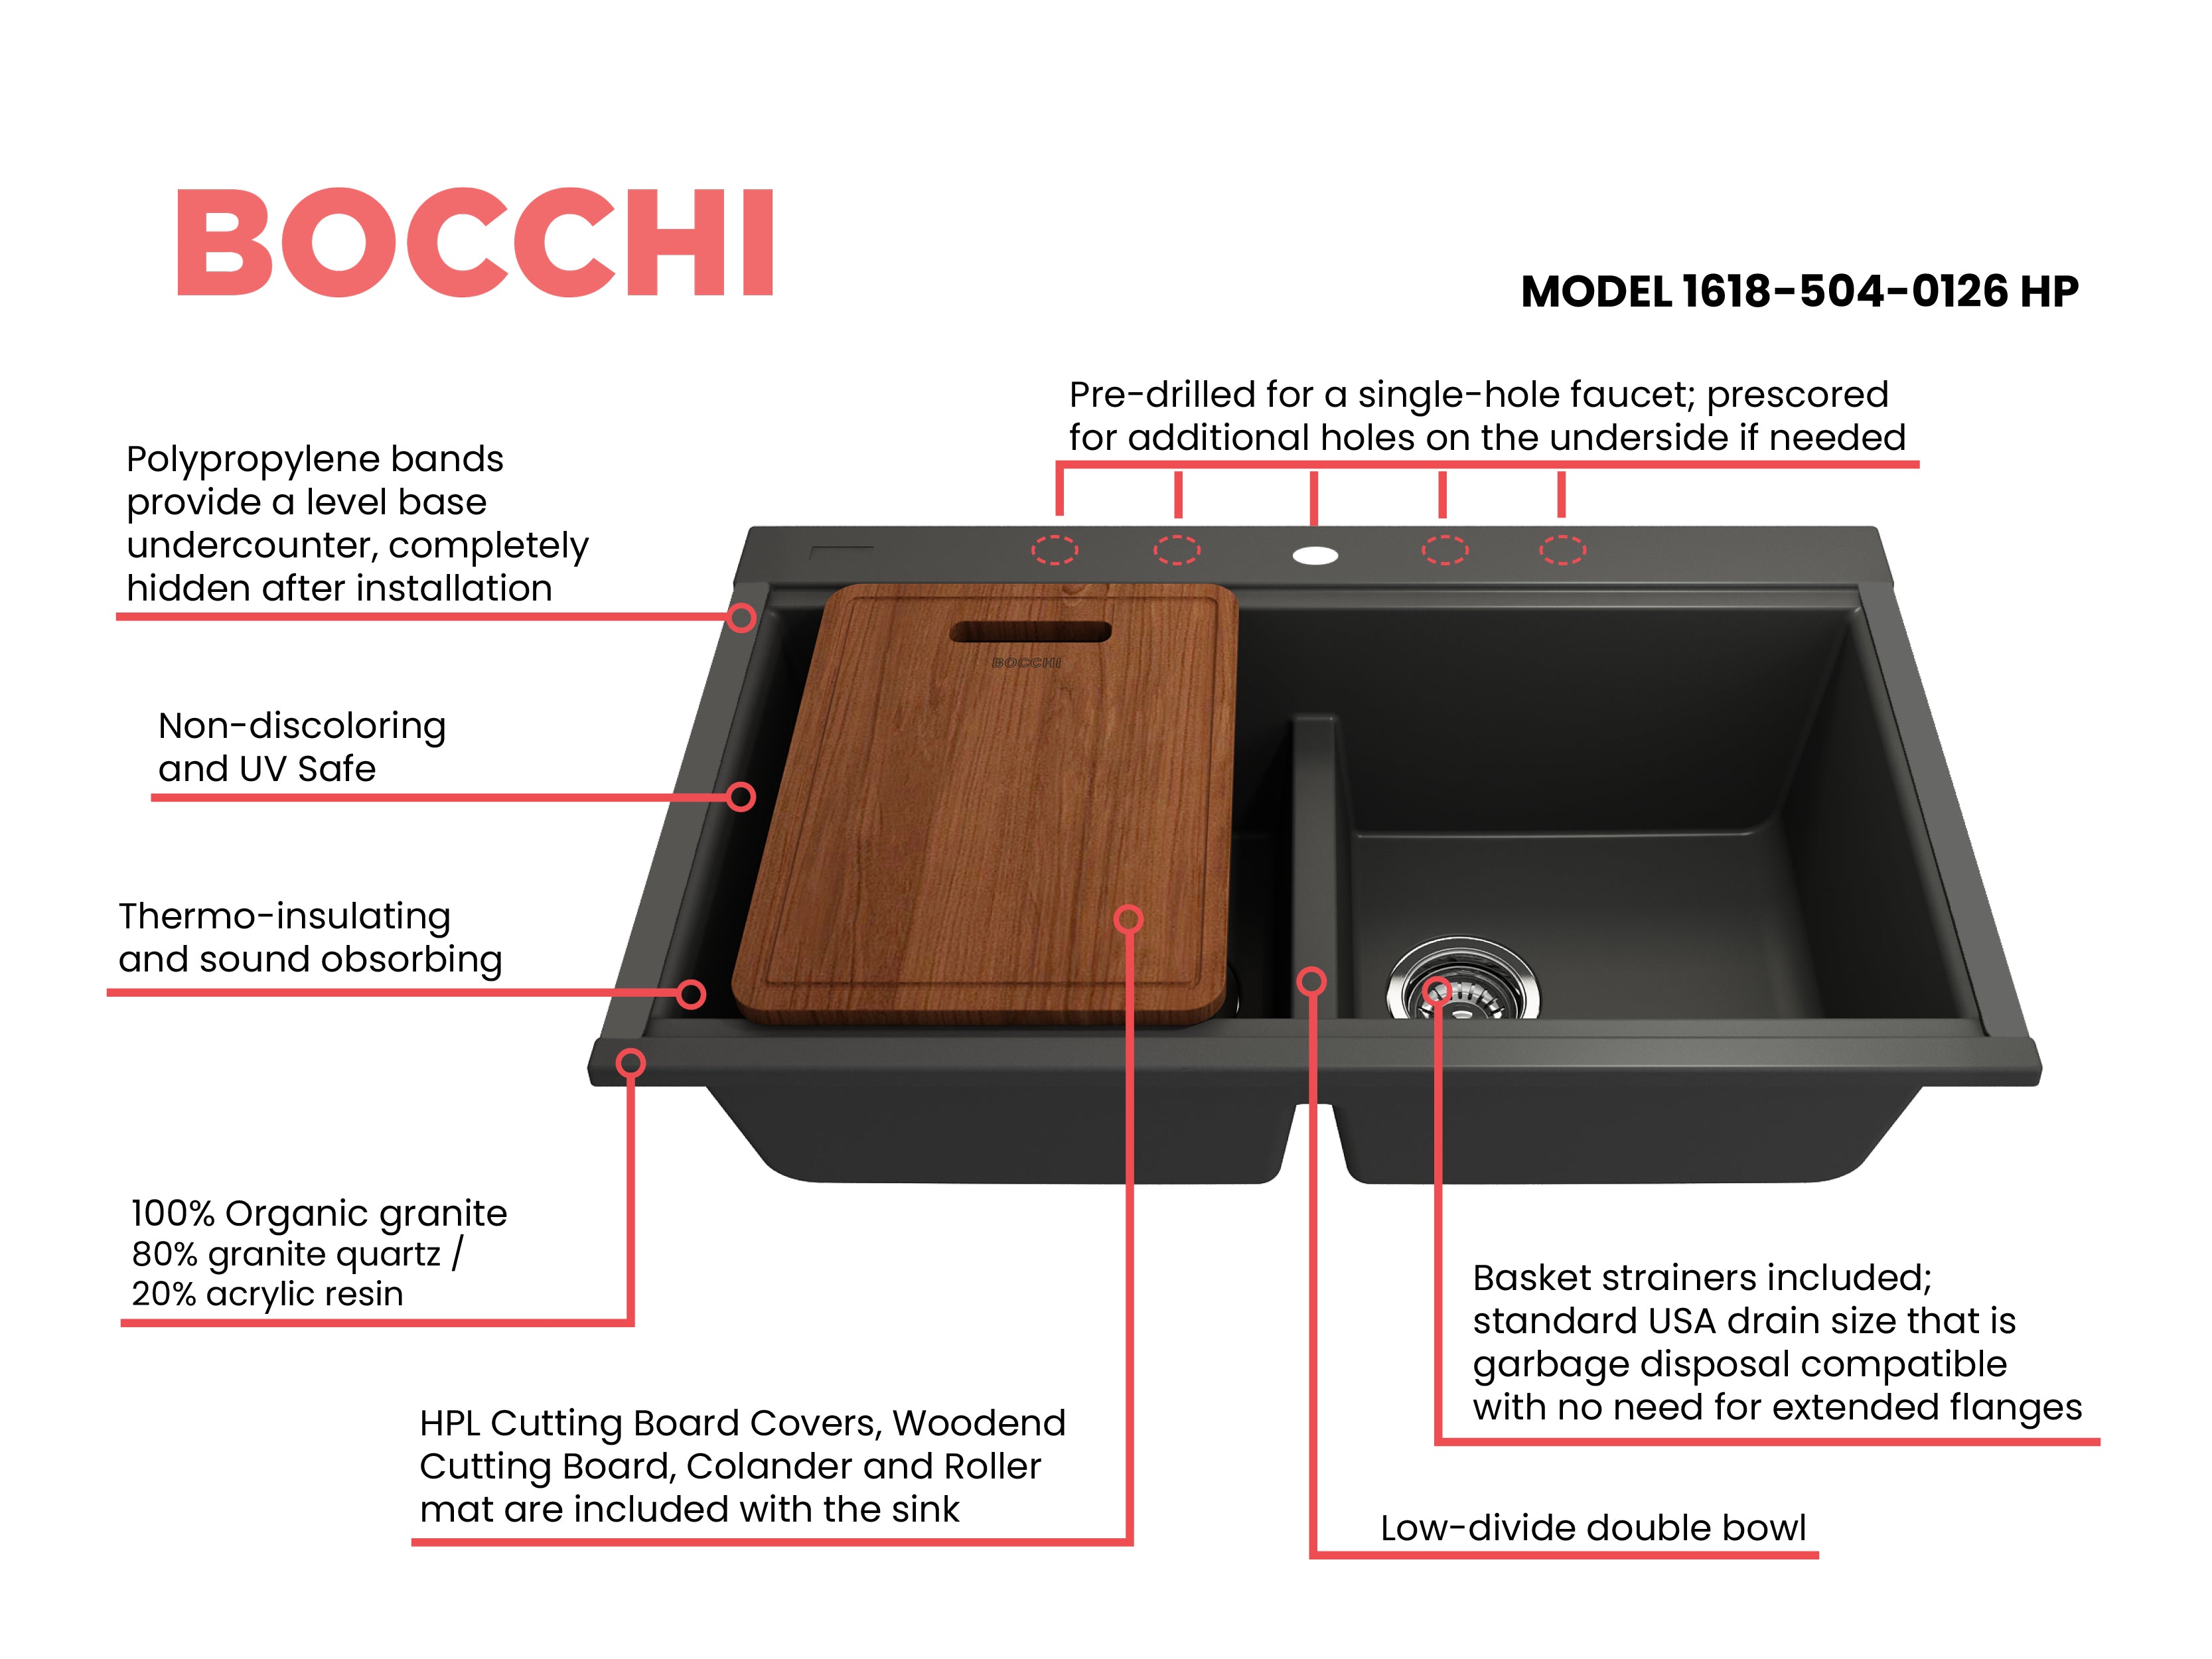 Bocchi 34" Undermount Double Bowl Composite Workstation Kitchen Sink with Covers in Matte Black